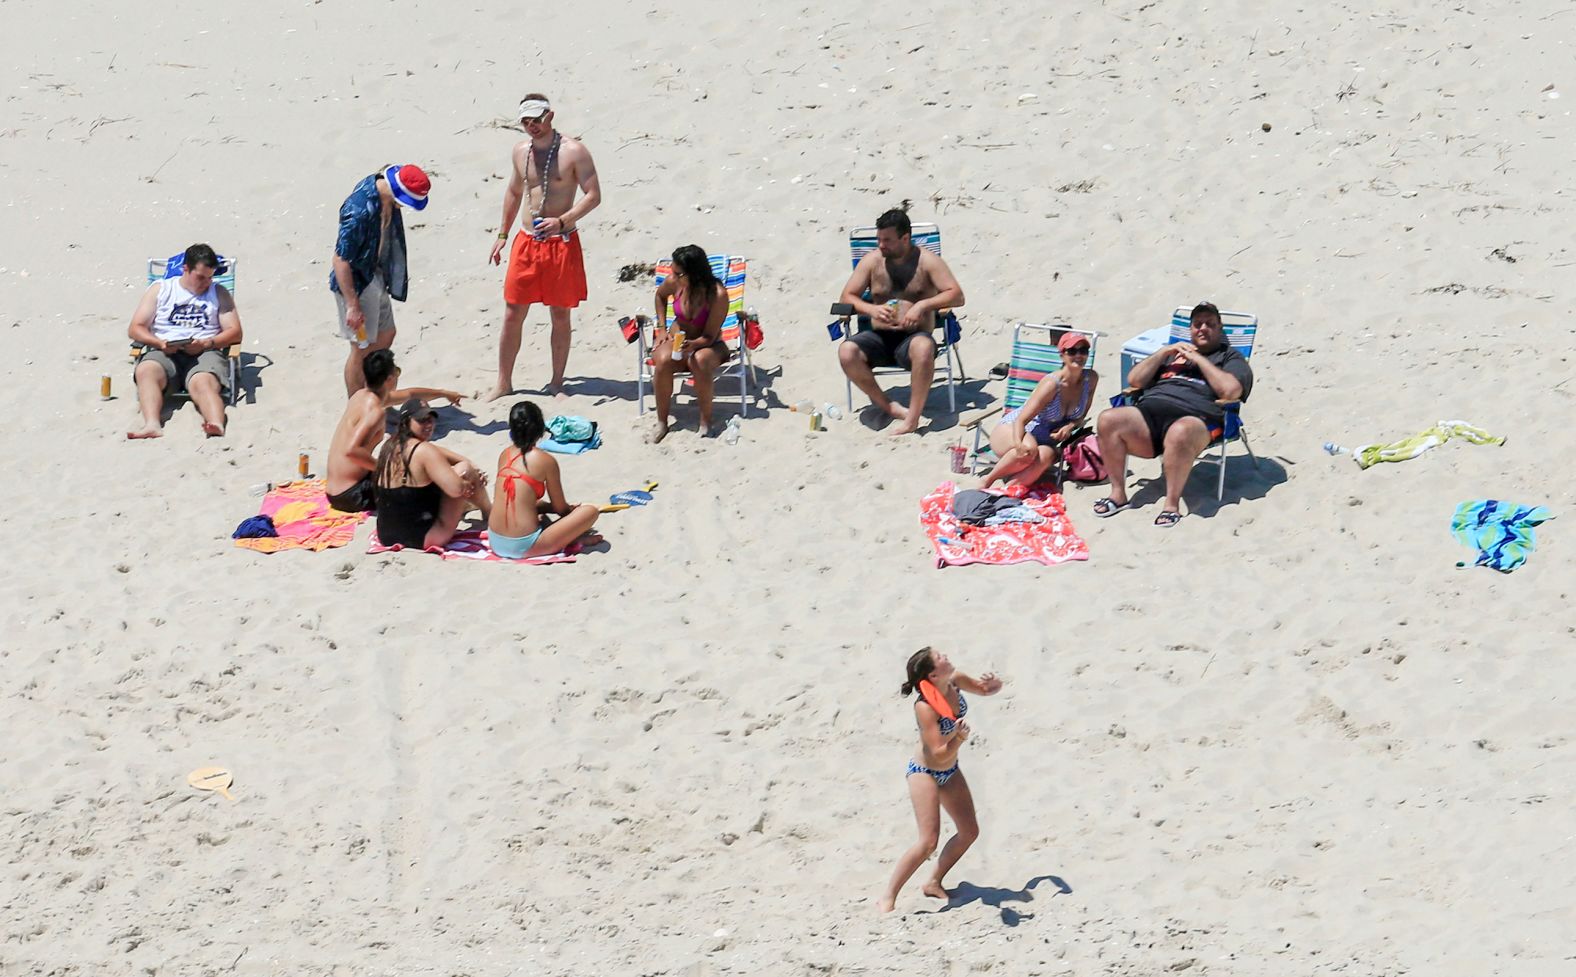 In July 2017, Christie spends time with family and friends at Island Beach State Park, where the governor has a summer residence. <a href="index.php?page=&url=http%3A%2F%2Fwww.cnn.com%2F2017%2F07%2F01%2Fpolitics%2Fnj-government-shutdown-chris-christie%2Findex.html" target="_blank">They were the only ones there</a> because two days earlier, Christie shut down the state government after the Legislature failed to pass a budget. All state-run tourist attractions were closed to the public.